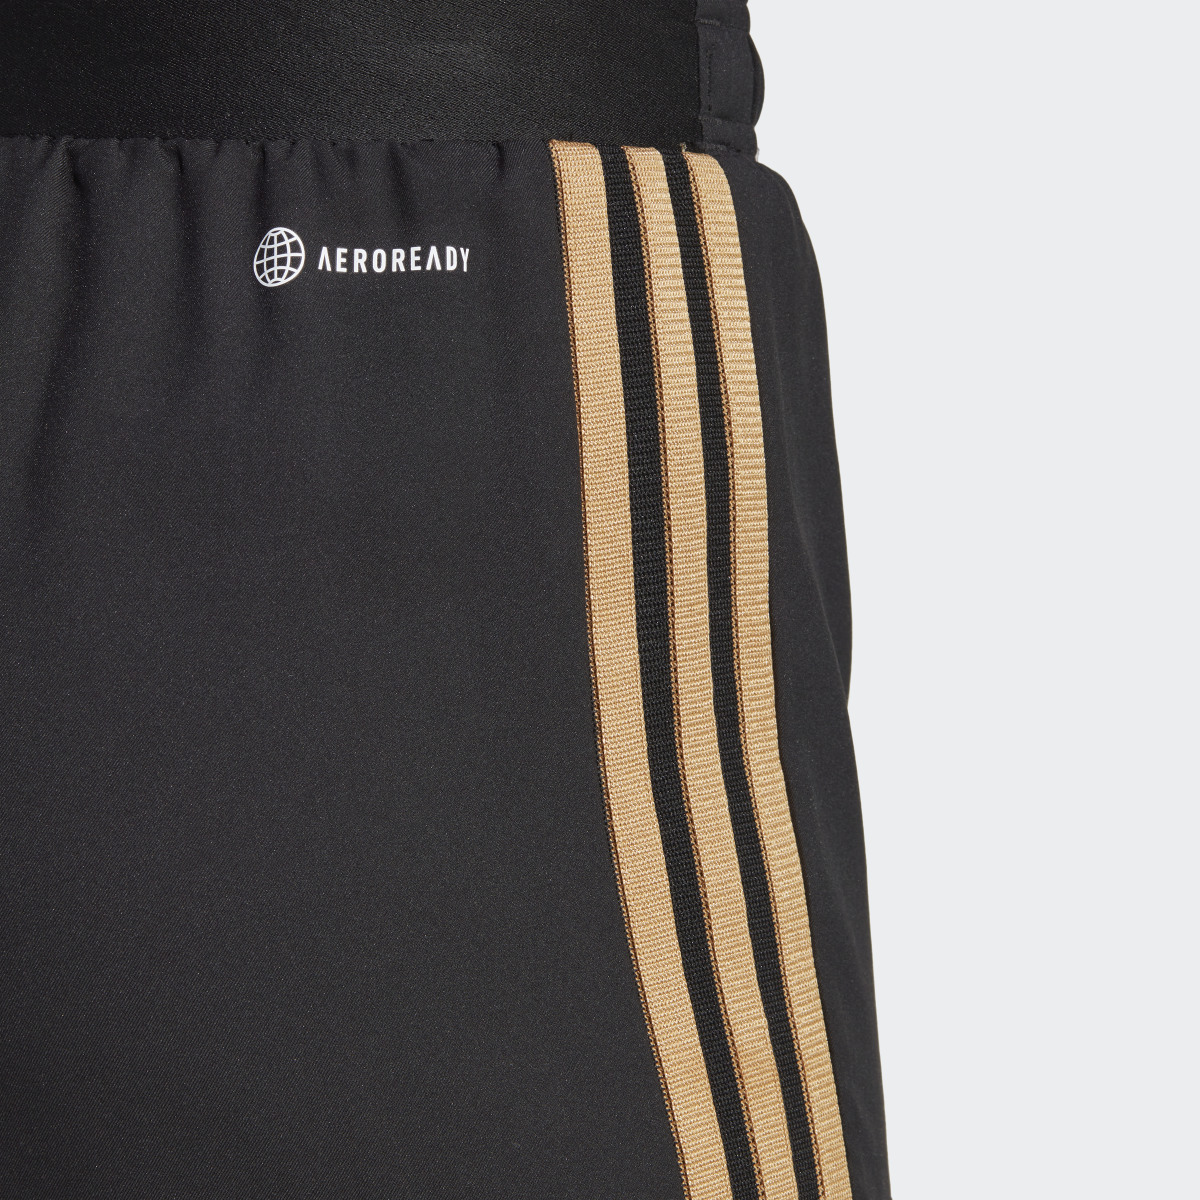 Adidas Germany Women's Team 23 Away Authentic Shorts. 6